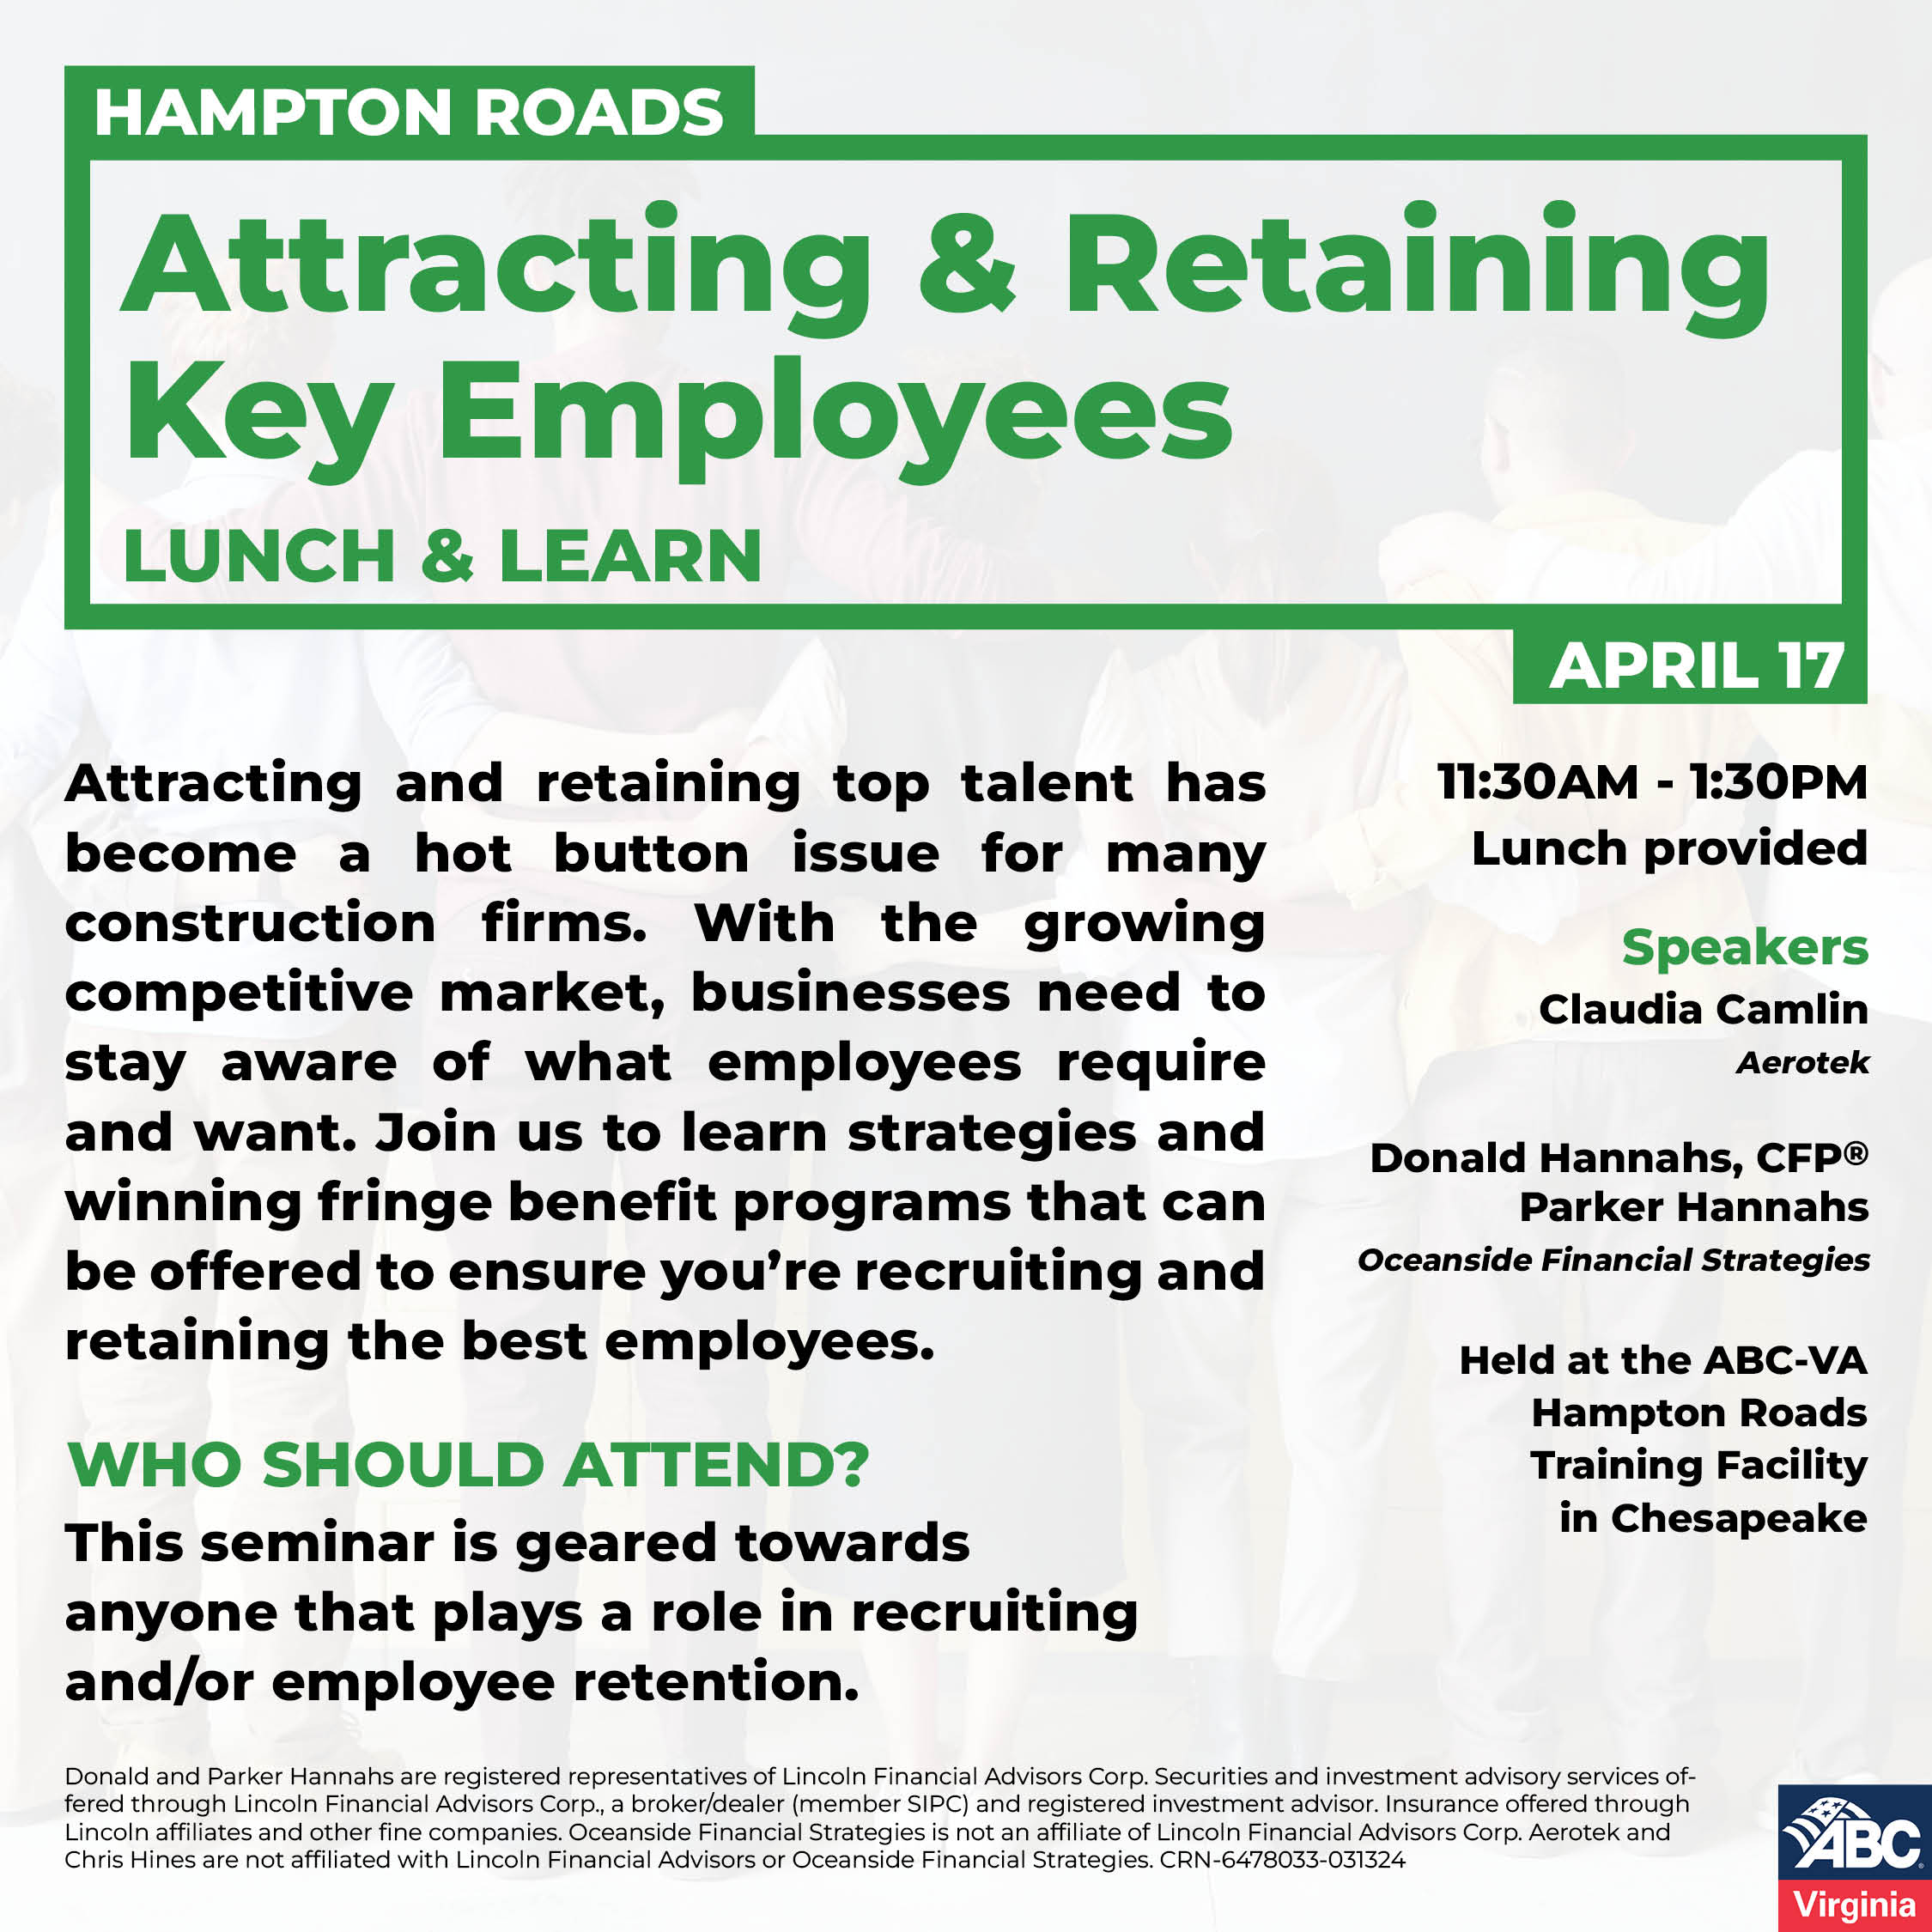 HR Attracting & Retaining Employees April 17 Web